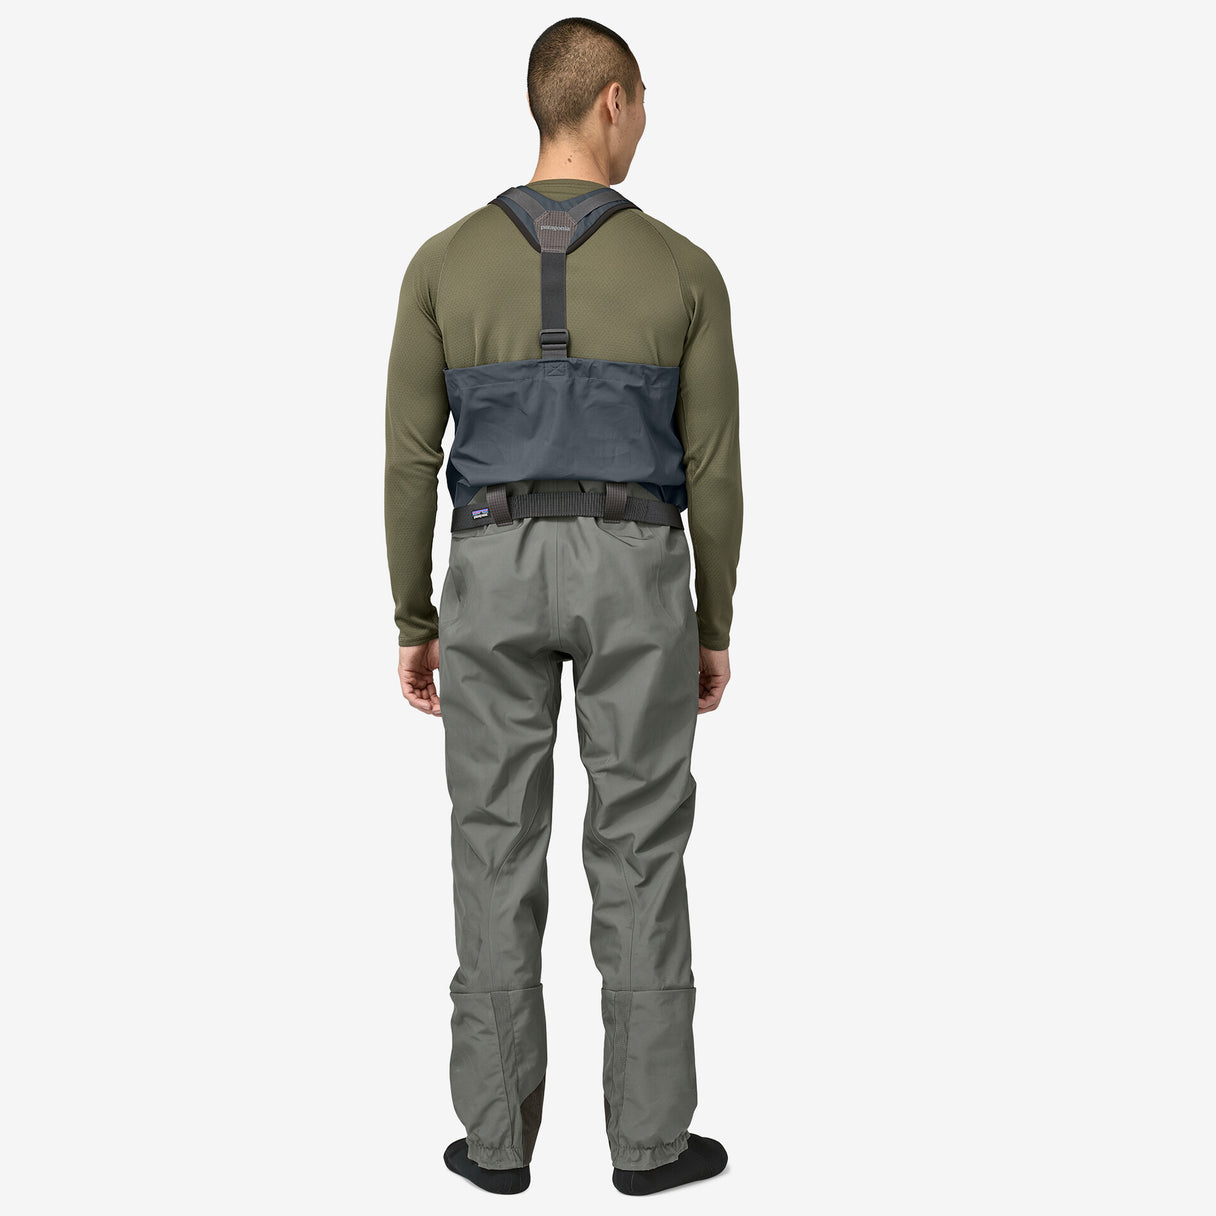 Patagonia Men's Swiftcurrent Expedition Waders (Lrl)